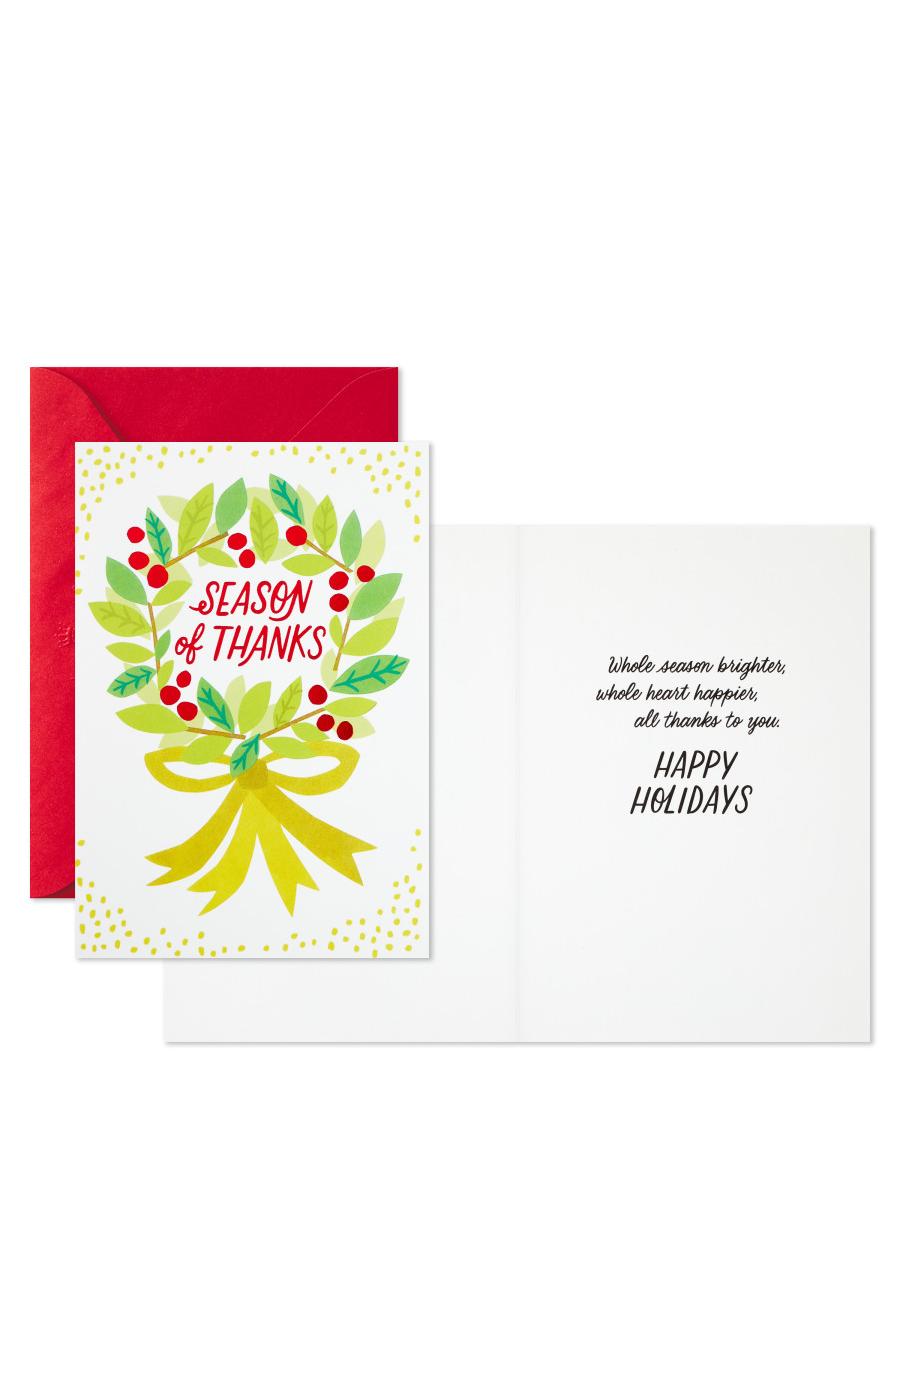 Hallmark Season of Thanks Christmas Cards with Envelopes - S1, S10; image 5 of 6